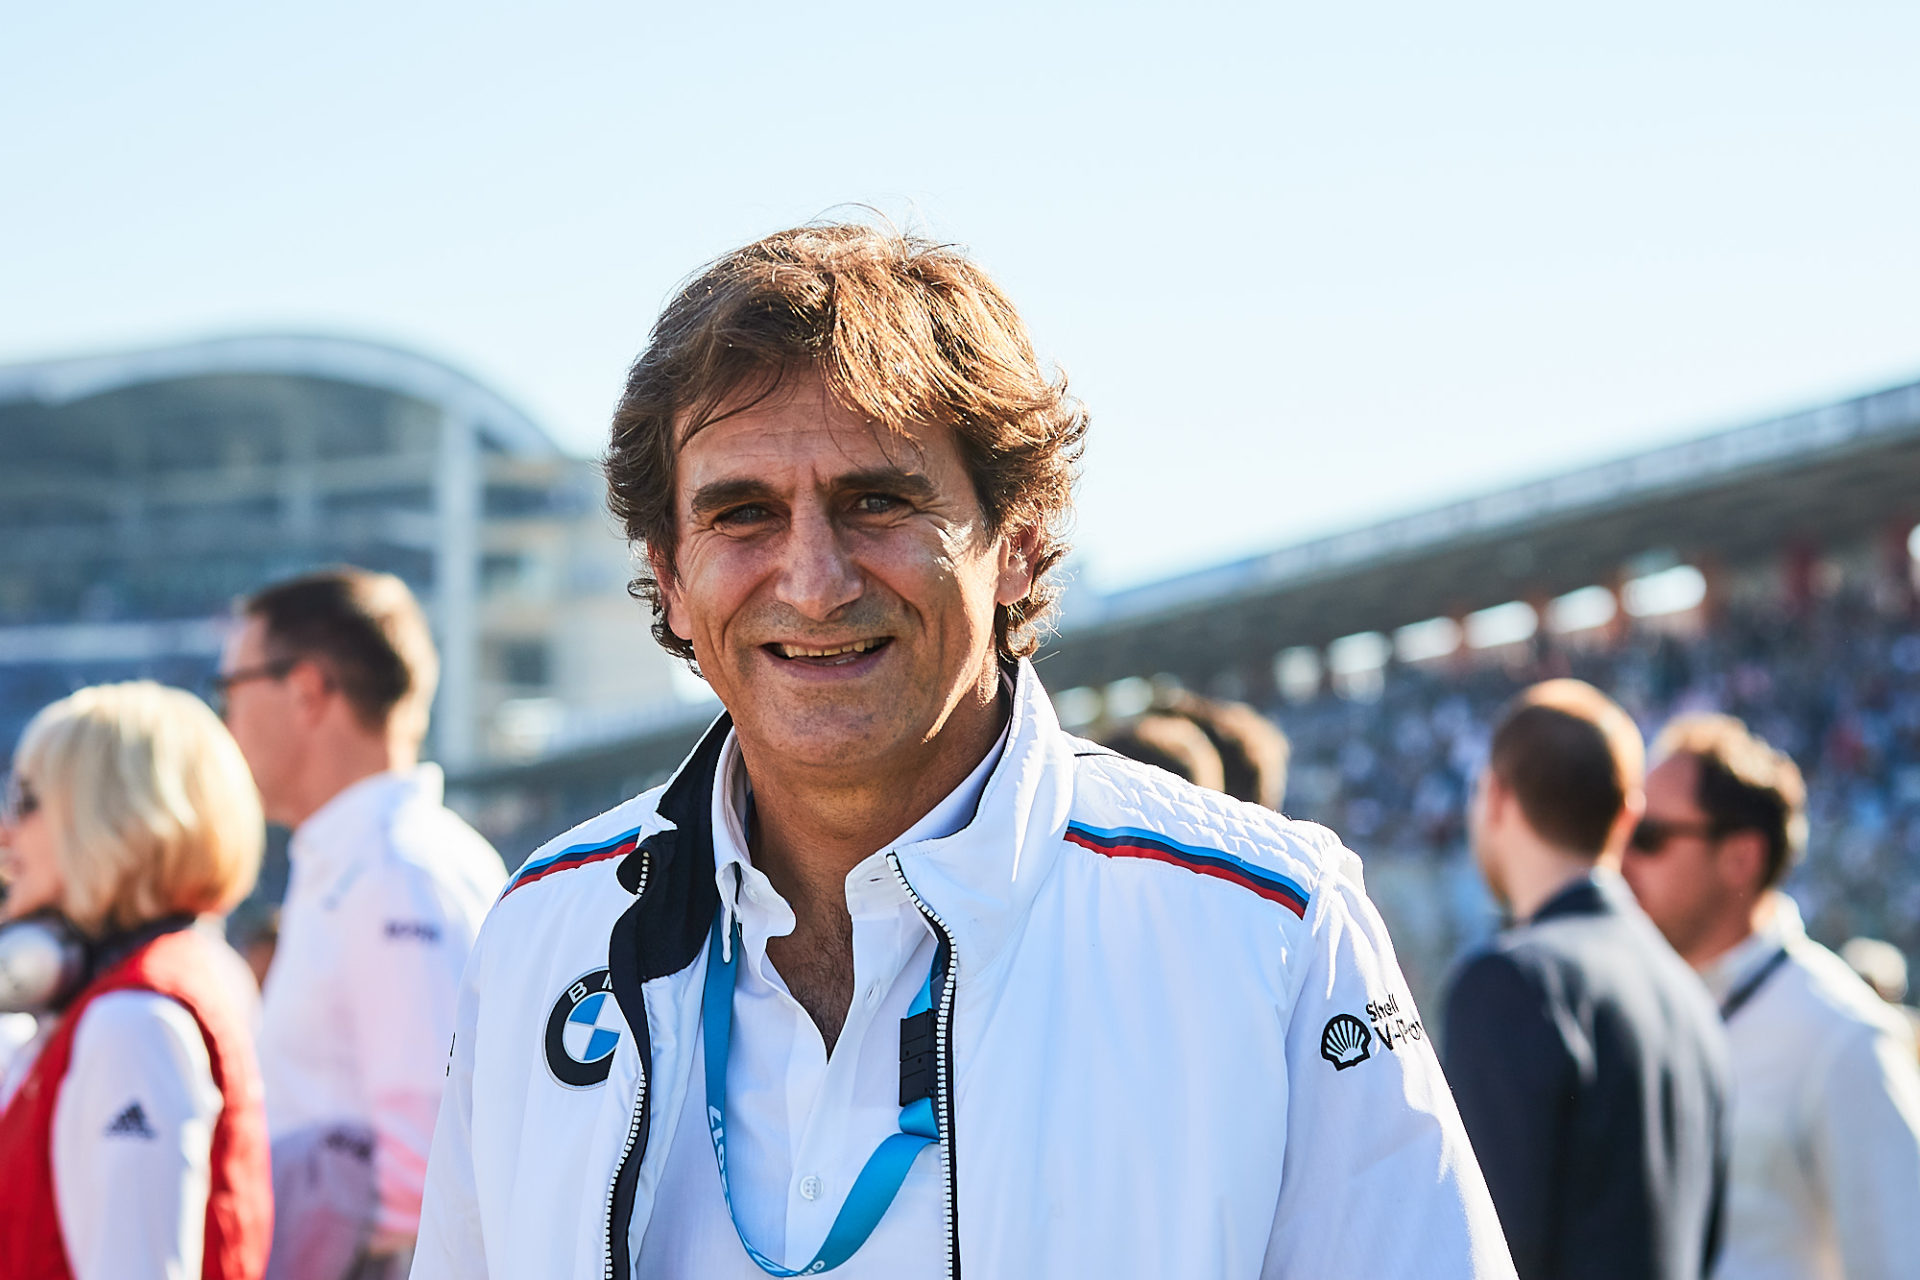 The return of Alex Zanardi: he will race in the DTM Championship on the Misano World Circuit.